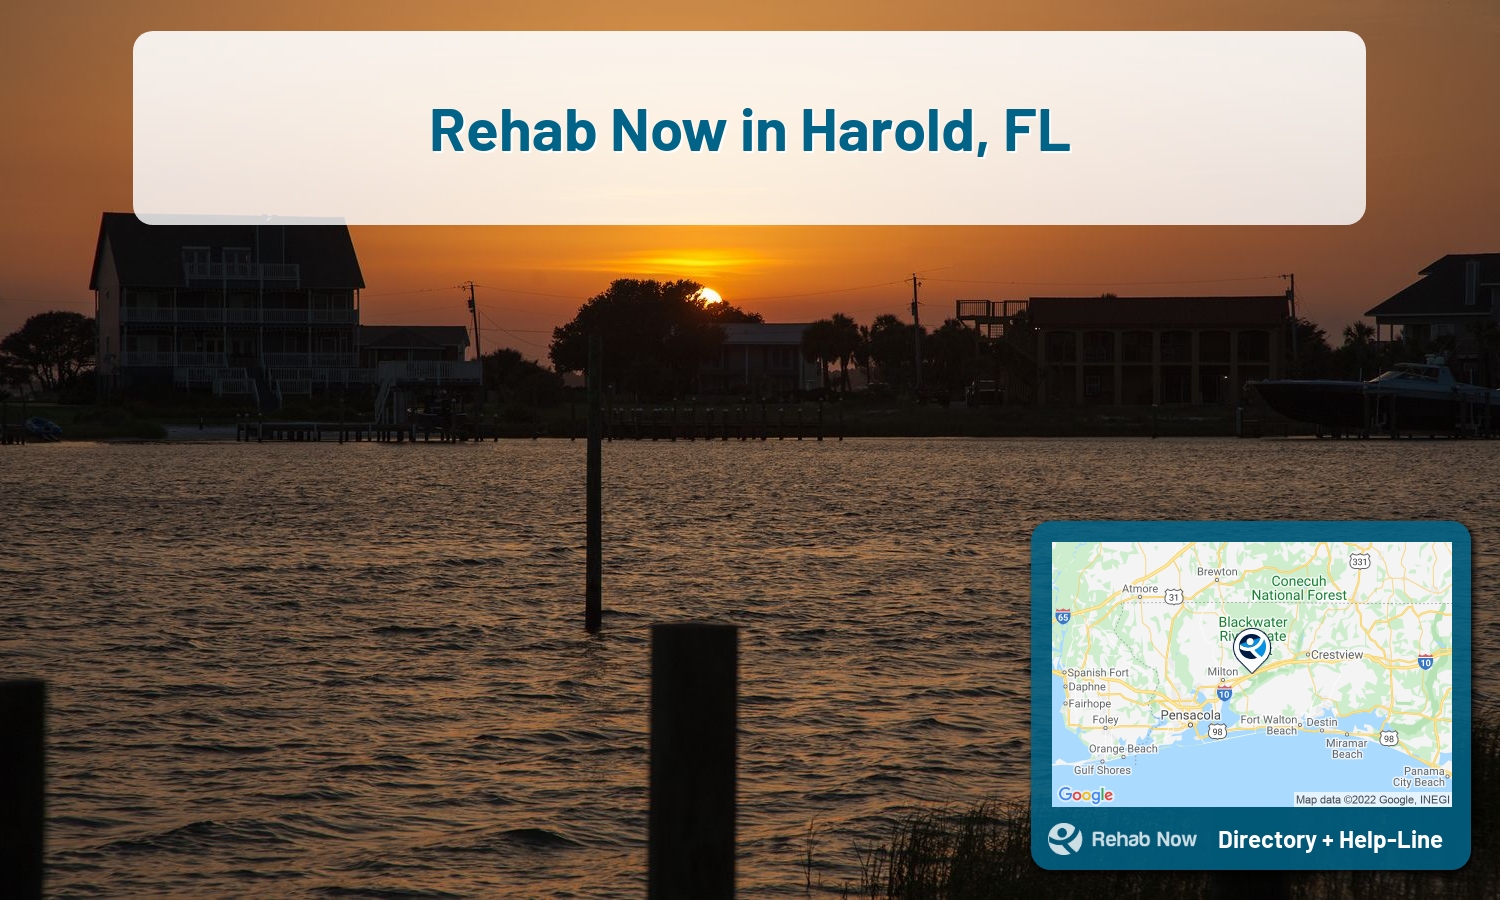 Drug rehab and alcohol treatment services nearby Harold, FL. Need help choosing a treatment program? Call our free hotline!